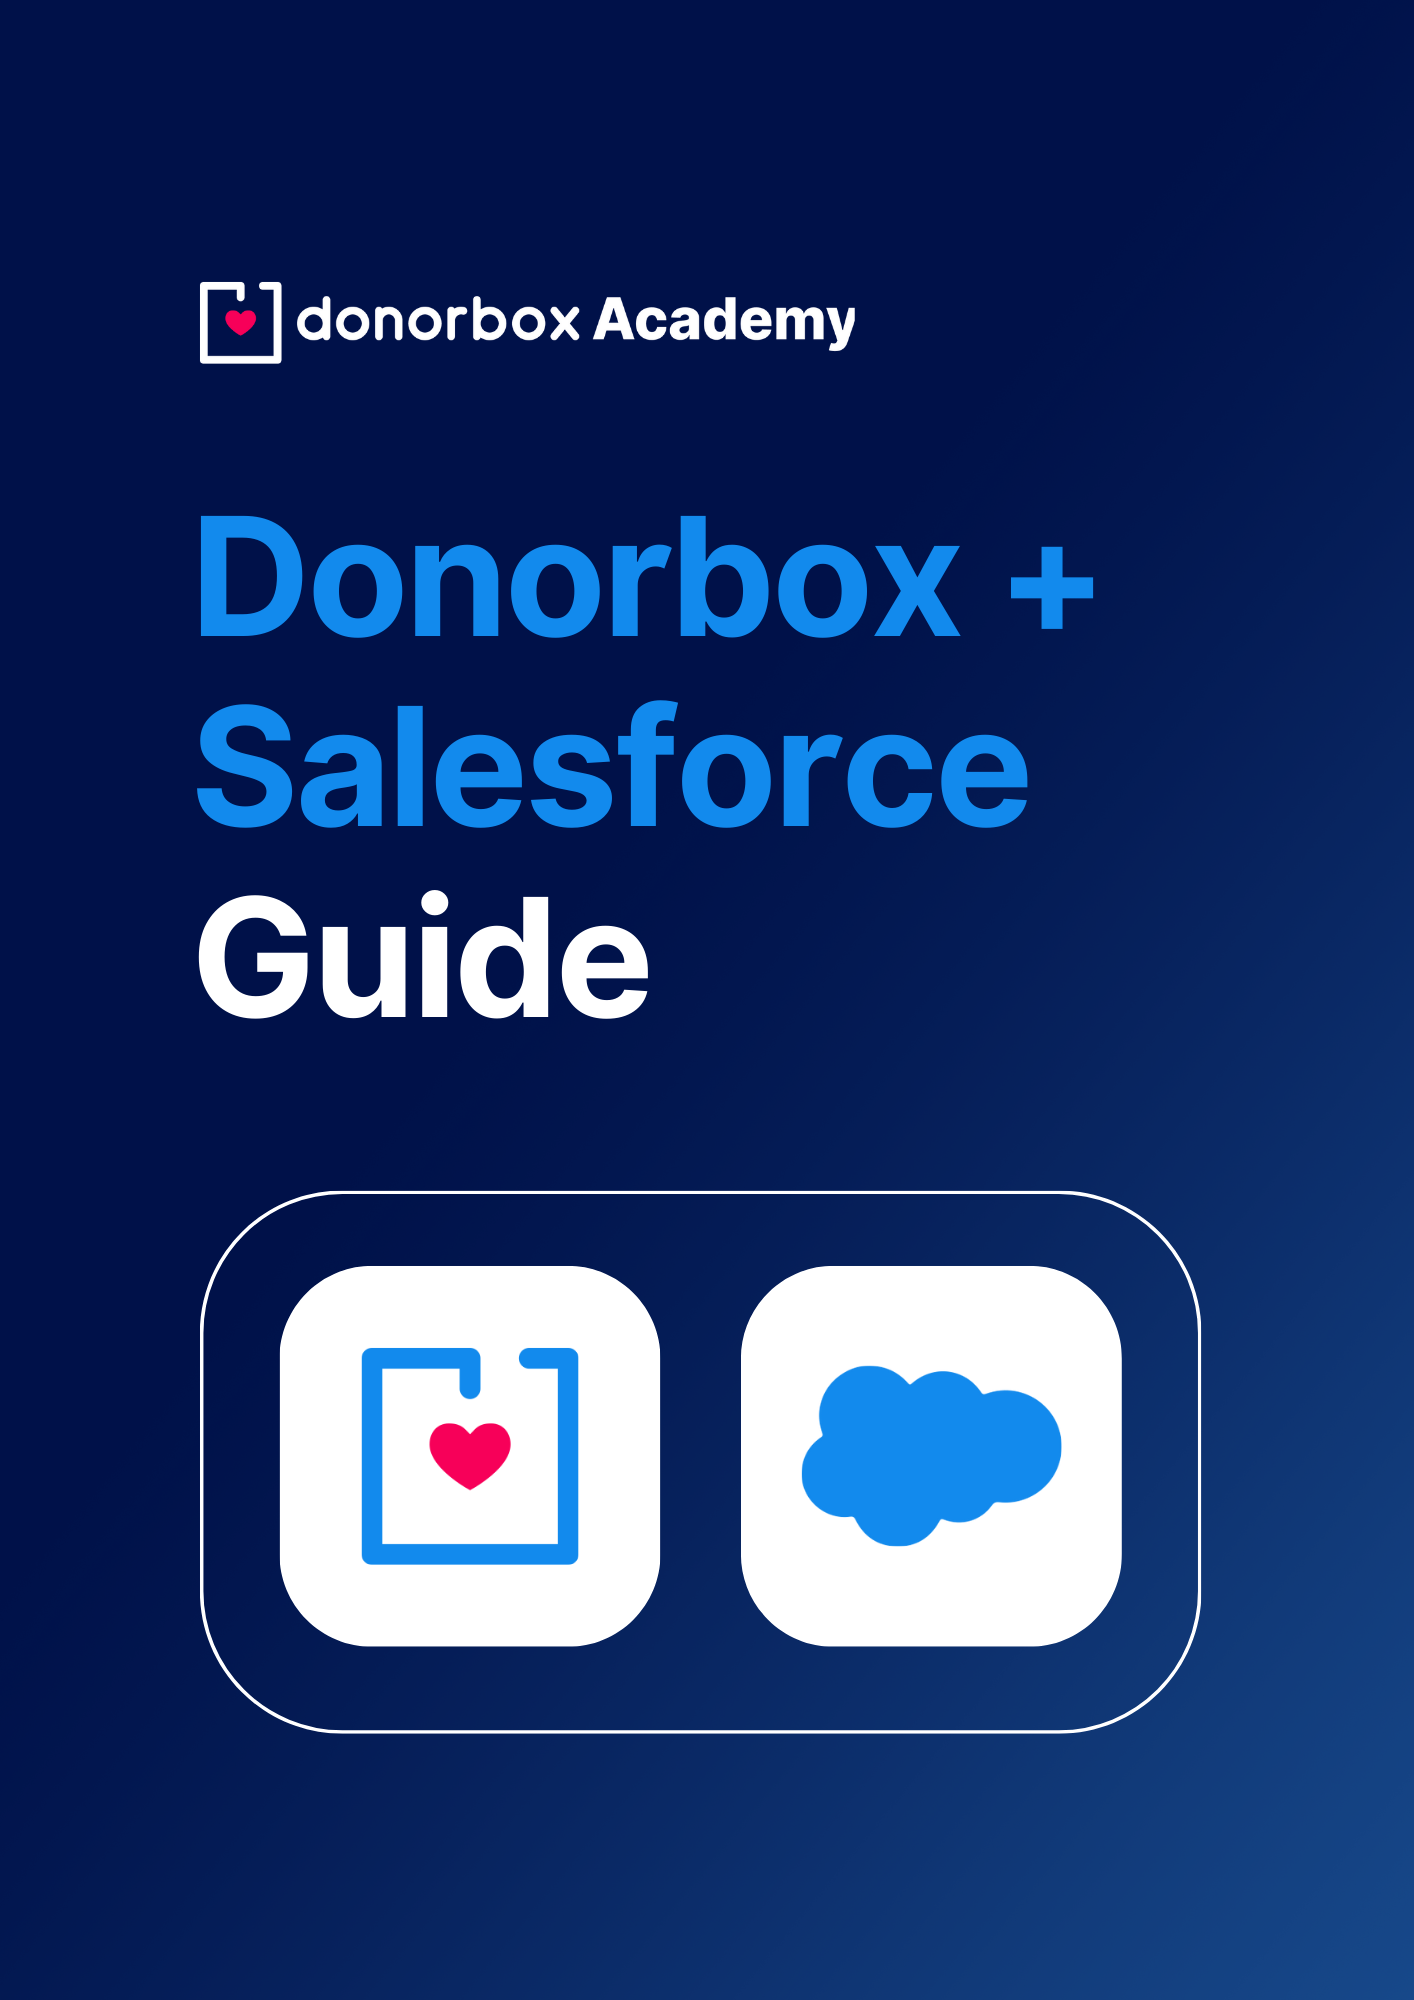 Donorbox + Salesforce Guide